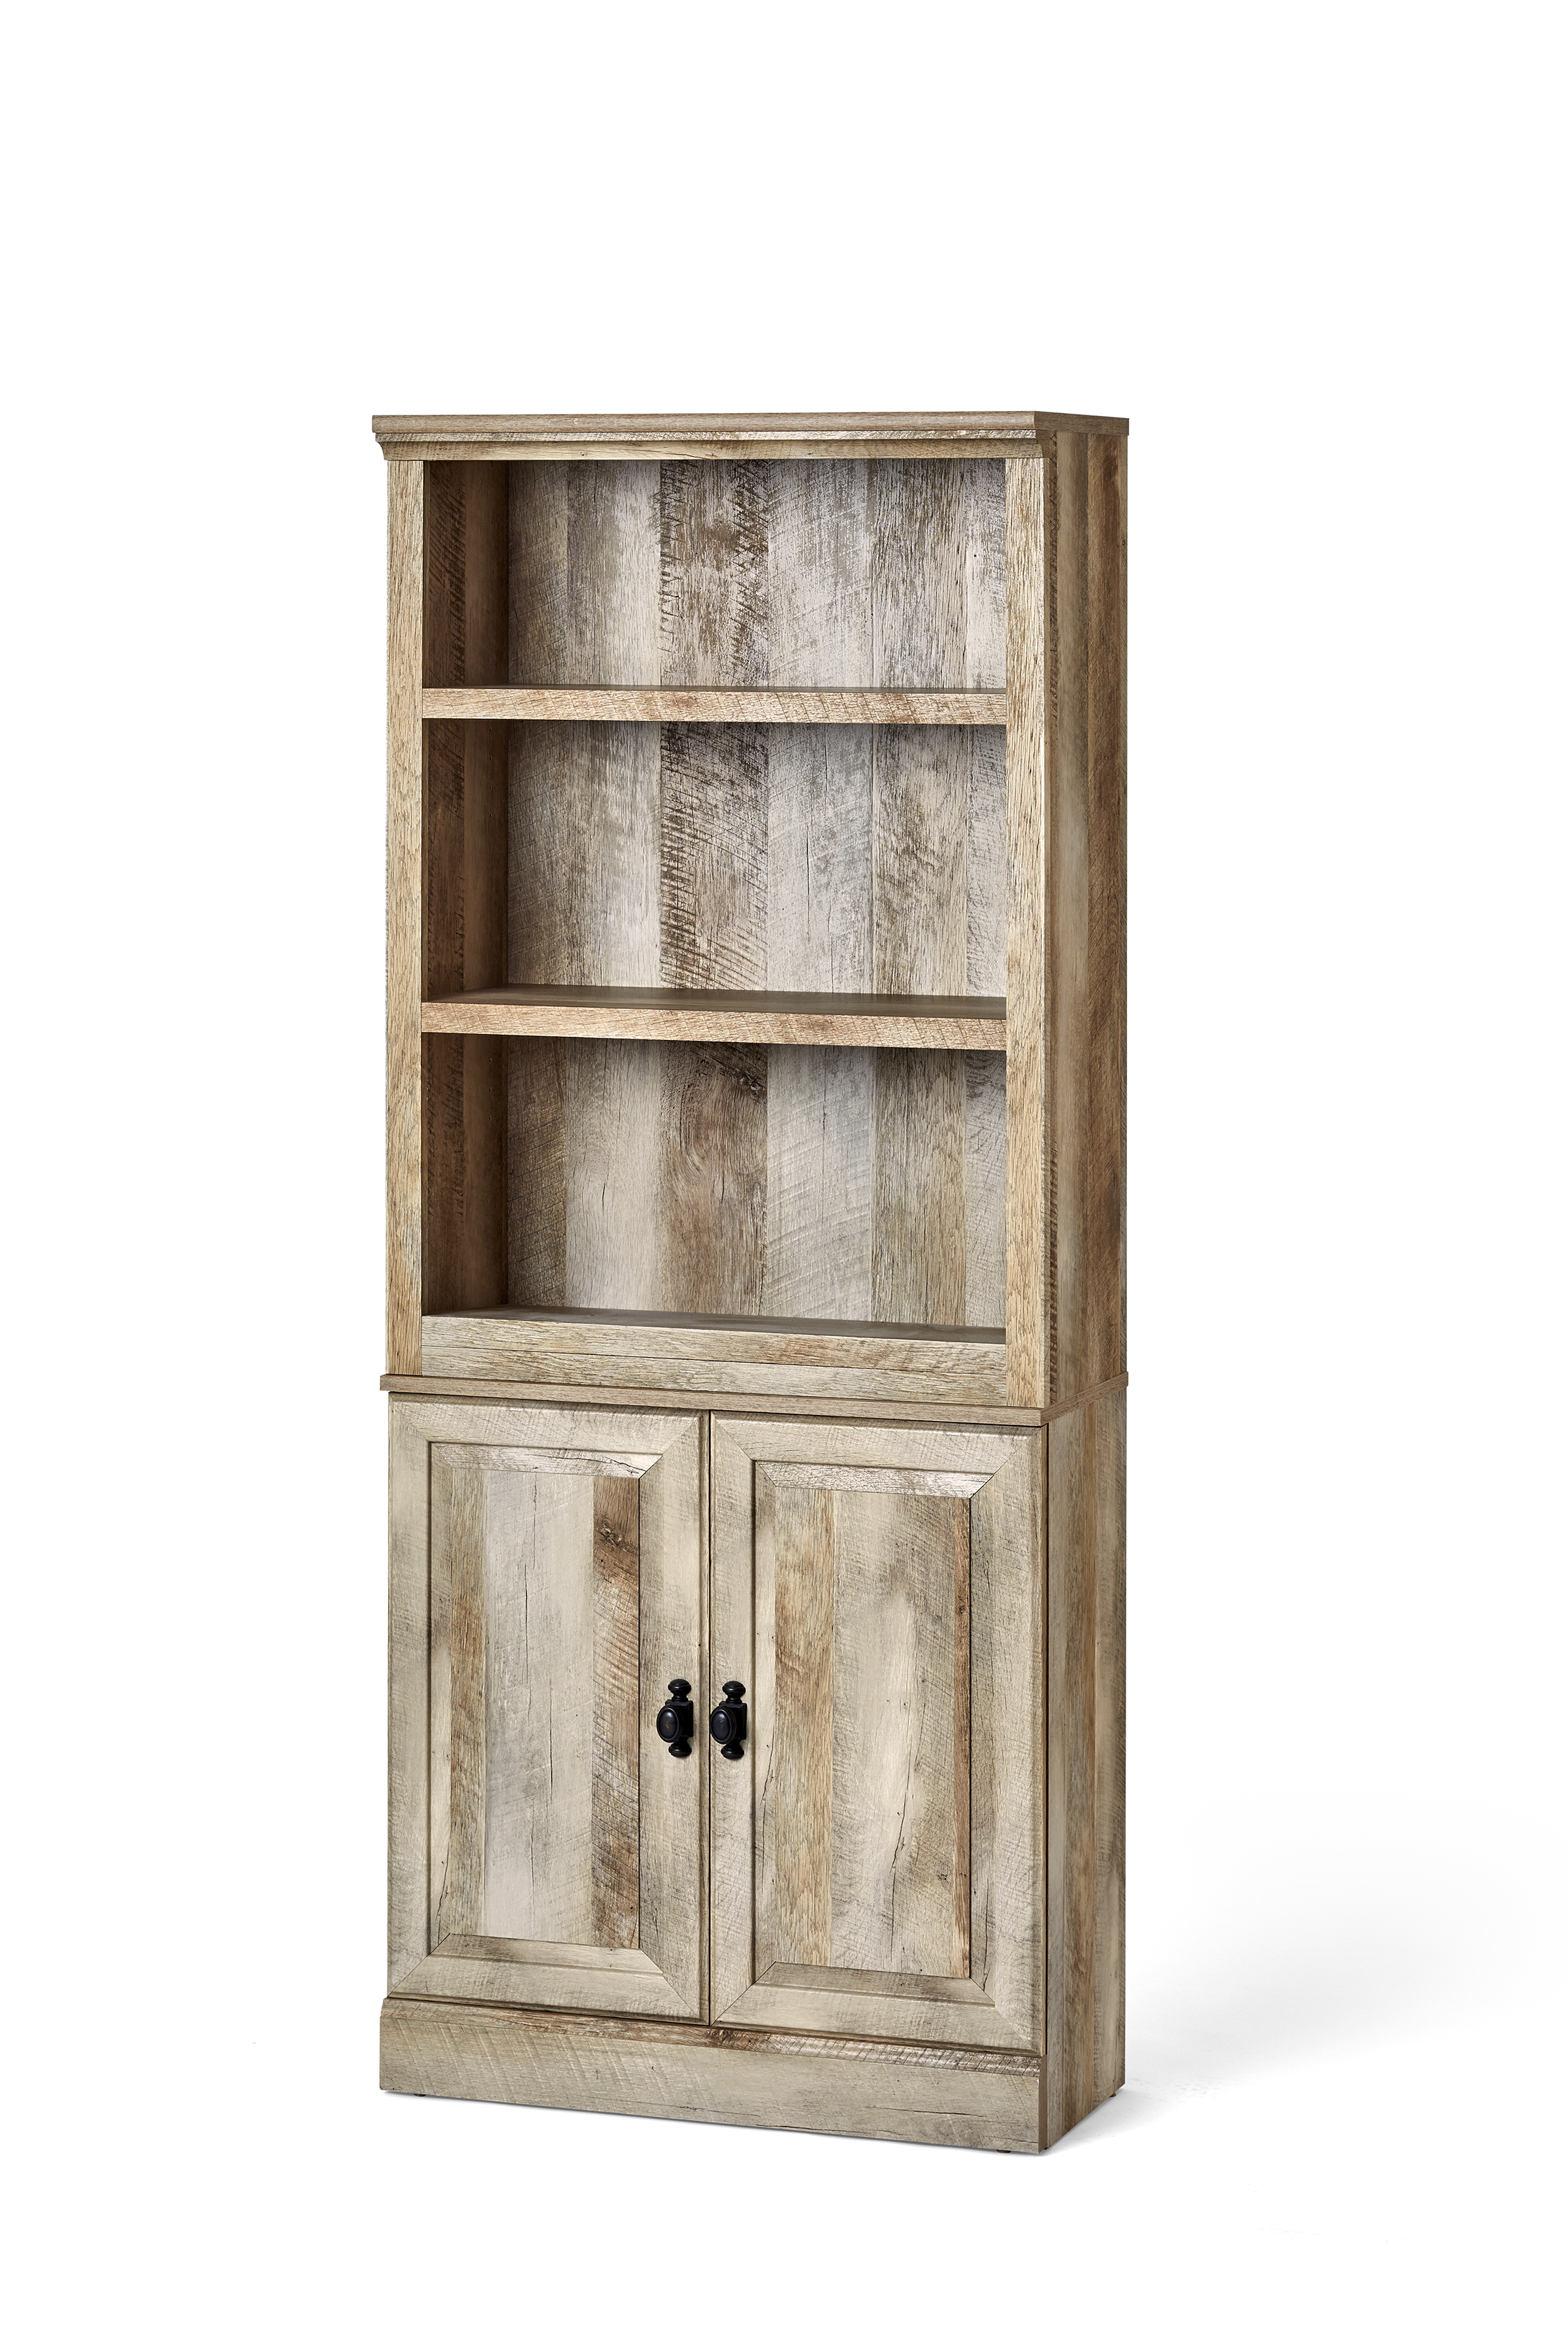 Better Homes & Gardens 71" Crossmill 5 Shelf Bookcase with Doors, Weathered Wood Finish - image 2 of 10